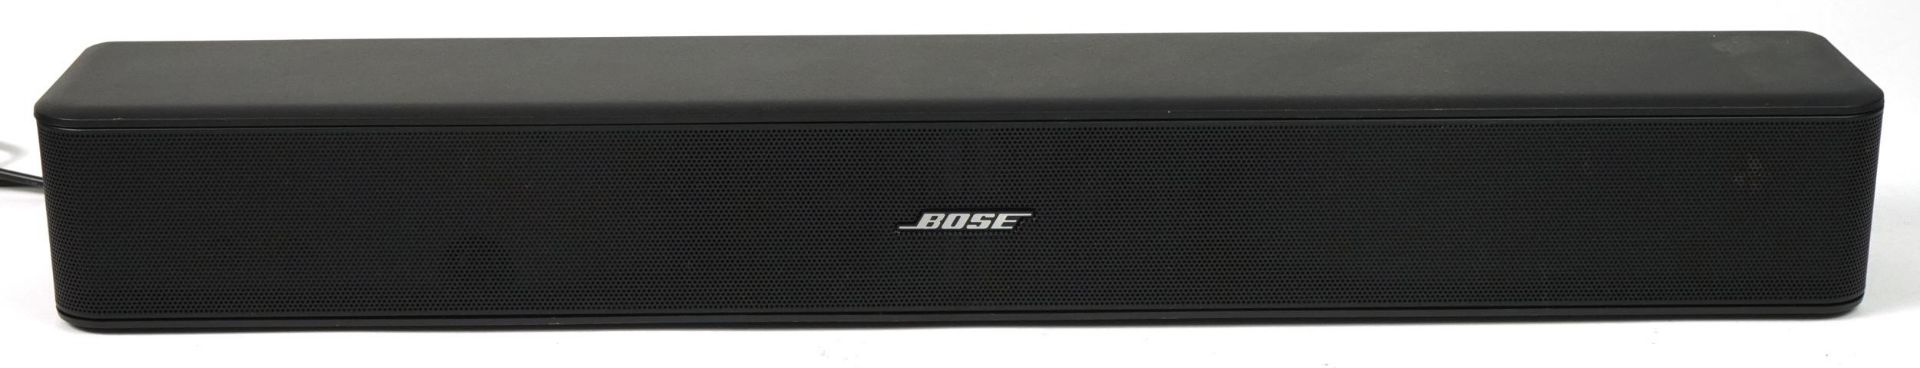 Bose sound bar with remote controls, the sound bar model 418775 : For further information on this